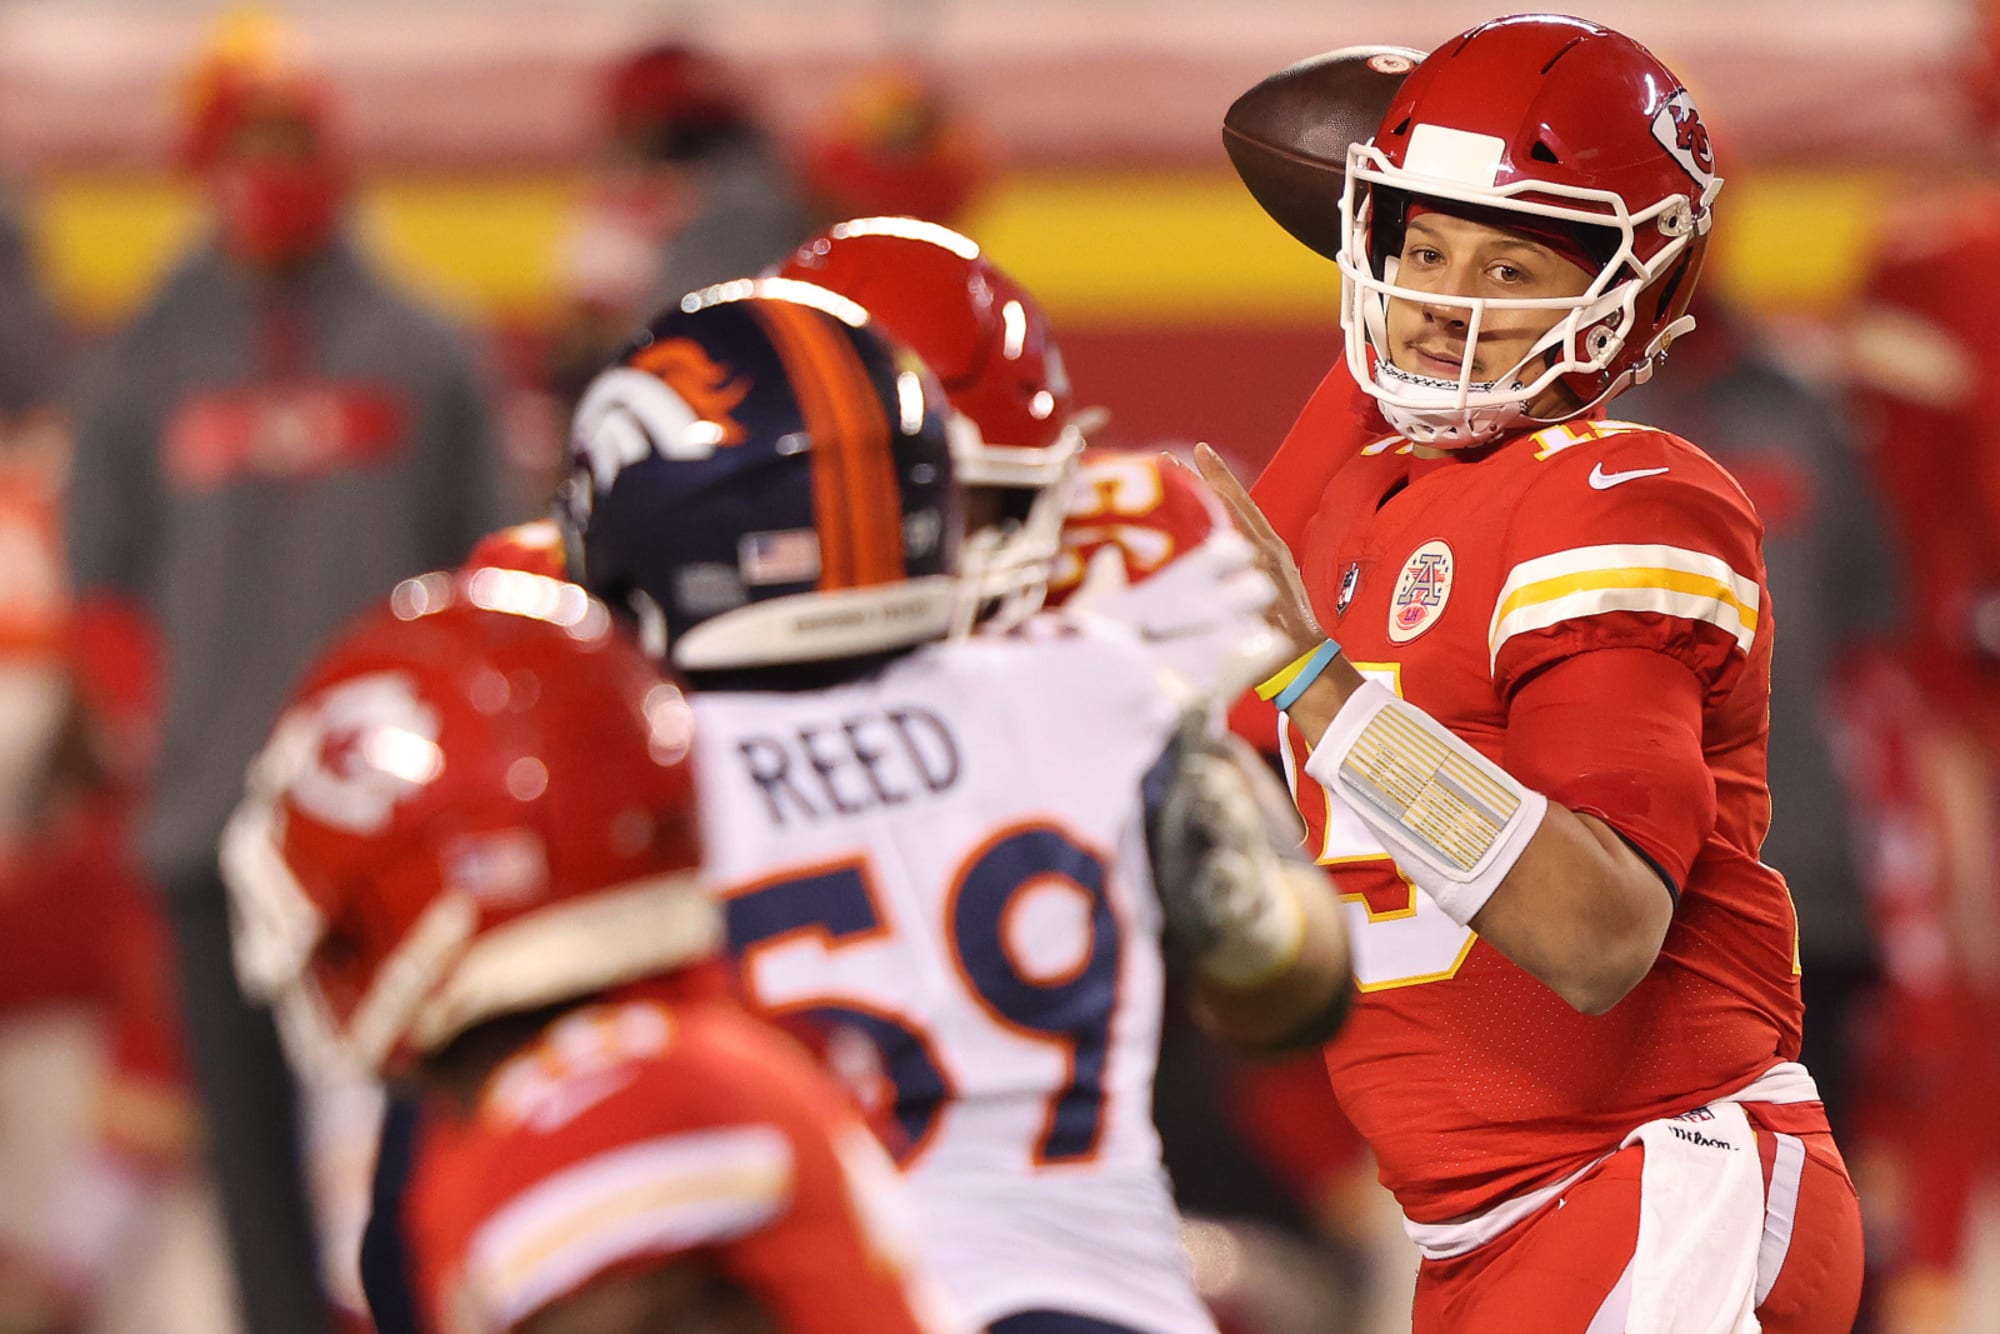 What channel is the KC Chiefs vs. Denver Broncos game on?